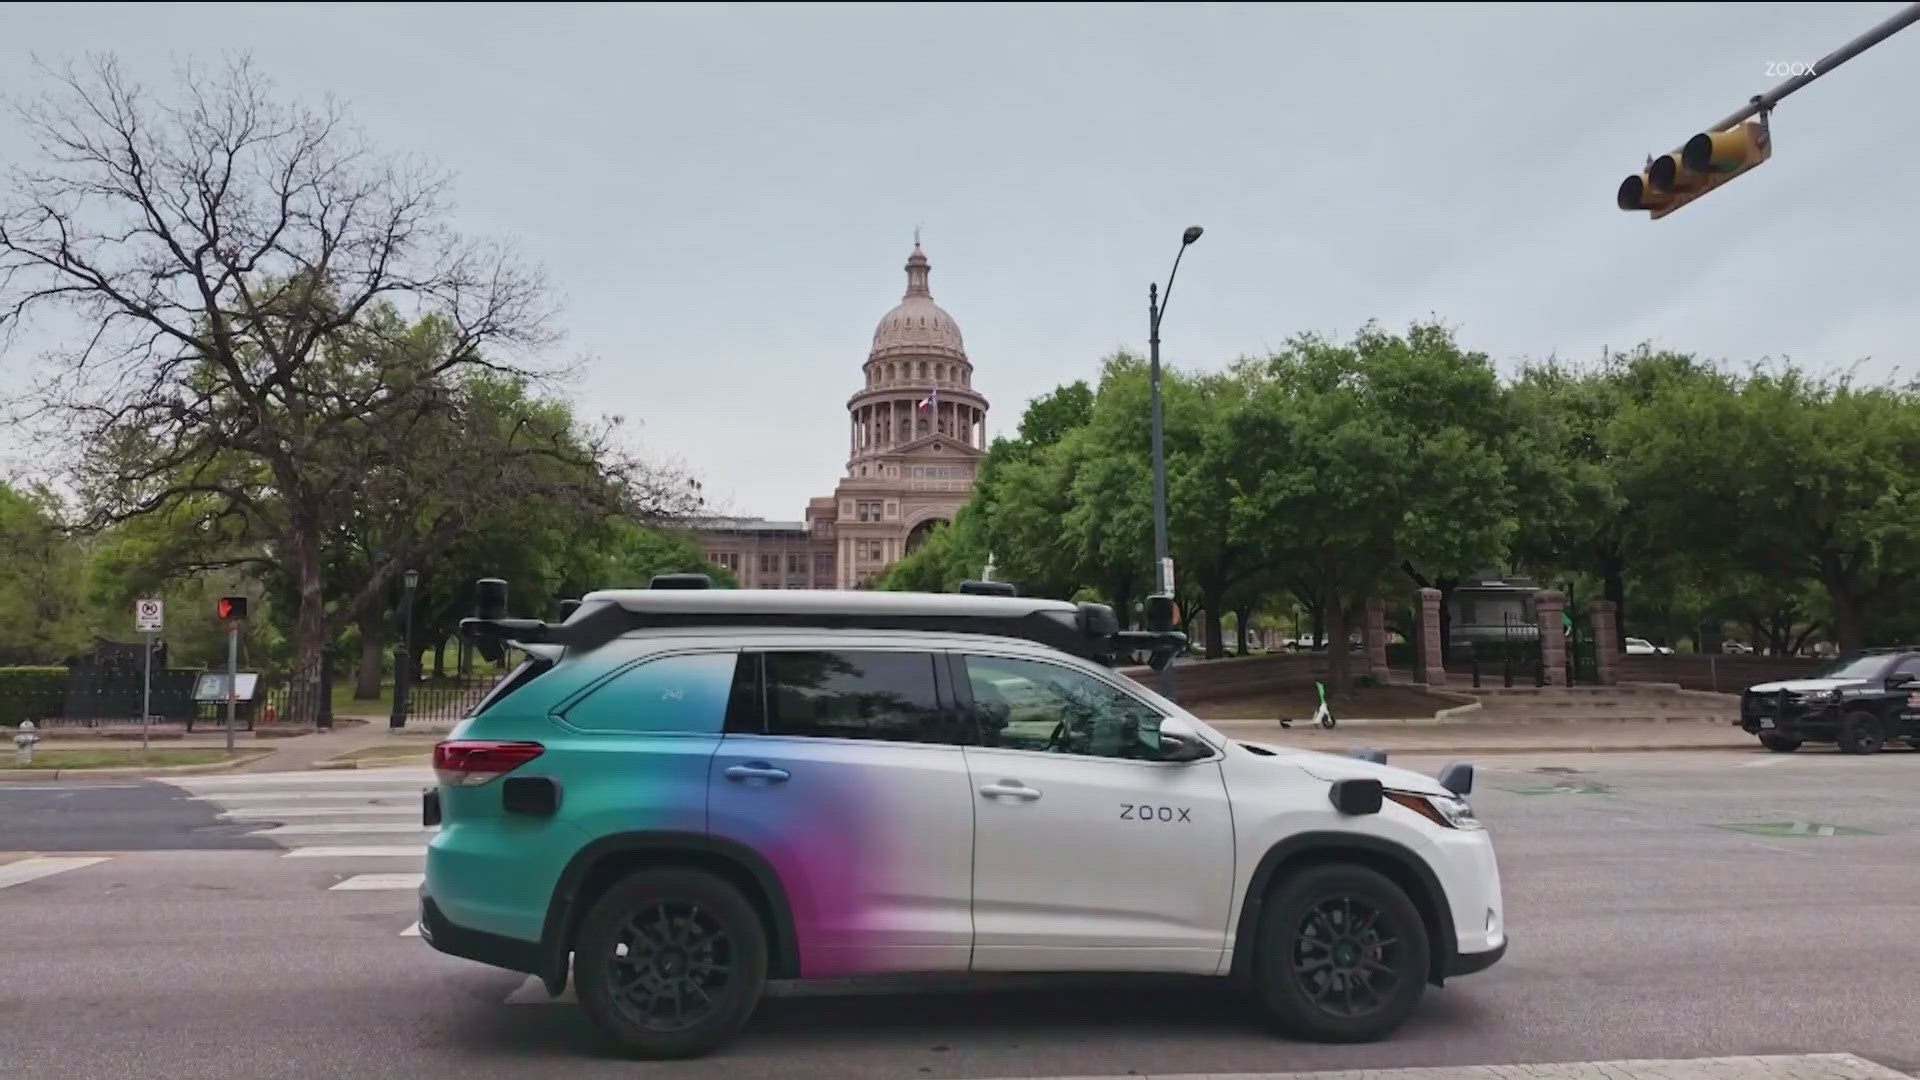 A new batch of self-driving cars from Zoox will begin testing around town. It comes after more autonomous vehicle companies ran into trouble in Austin.